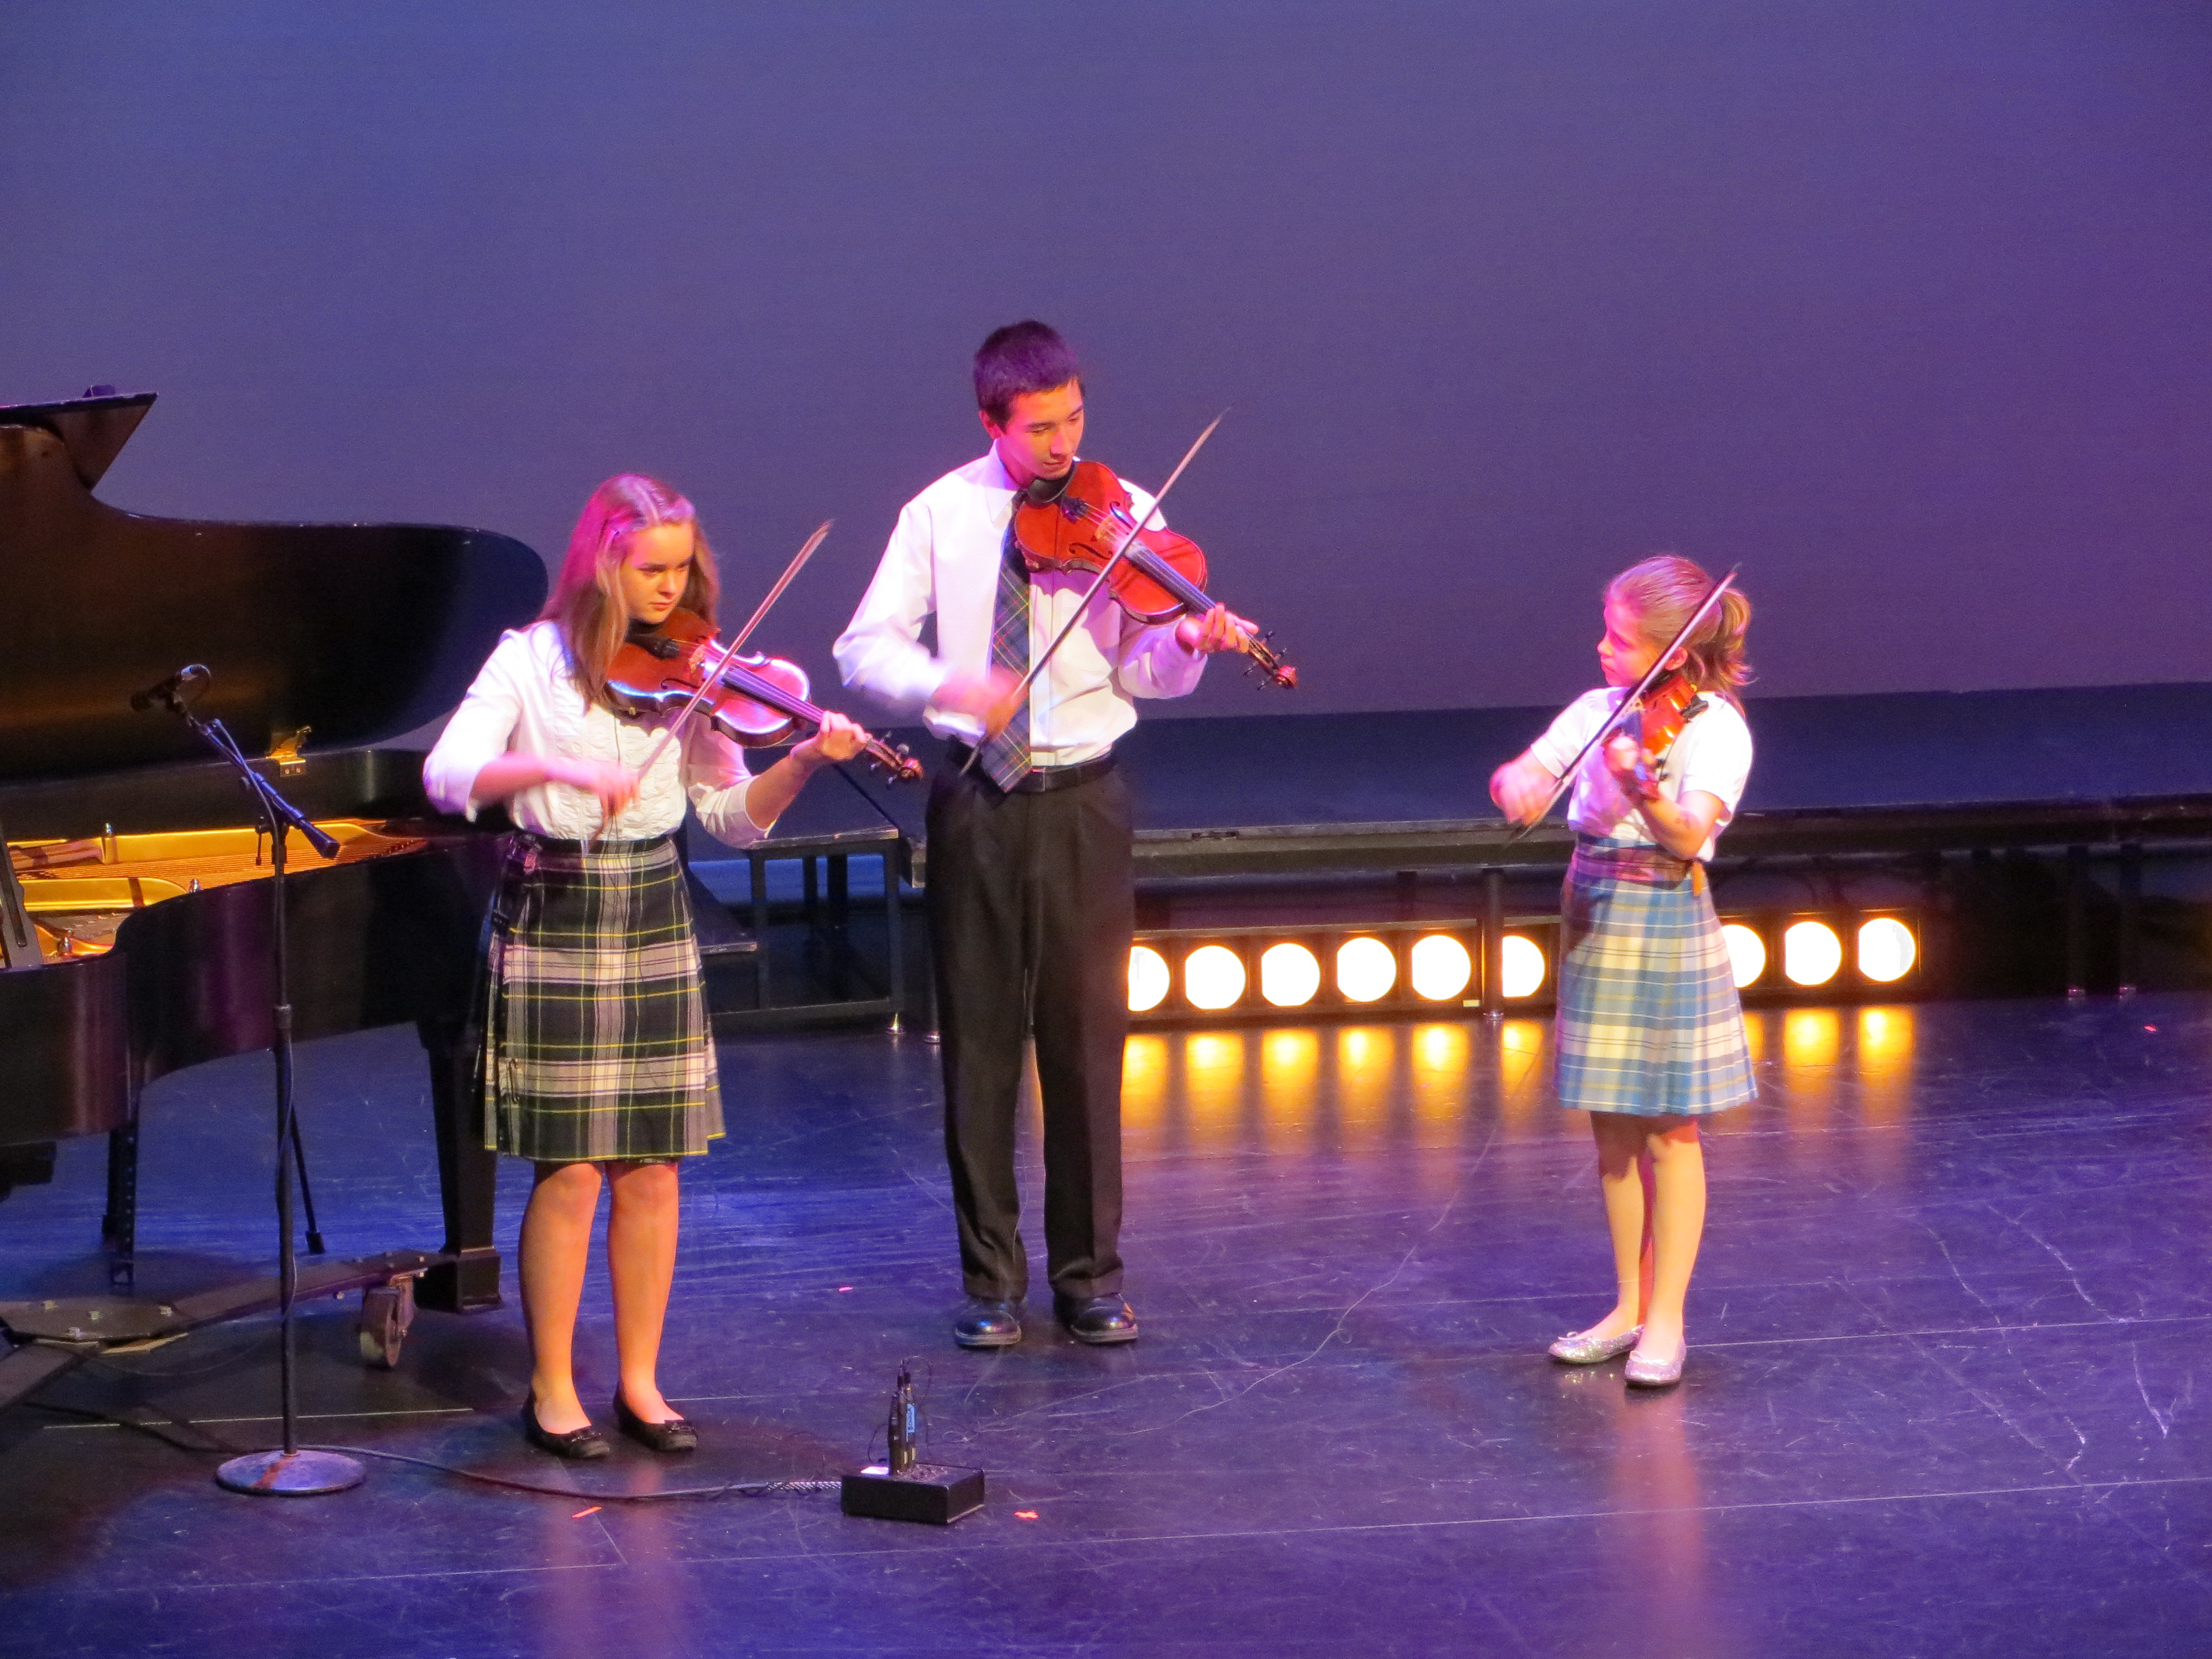 Playing at the concert, the trio, along with Guinevere, were a big favorite of the night!